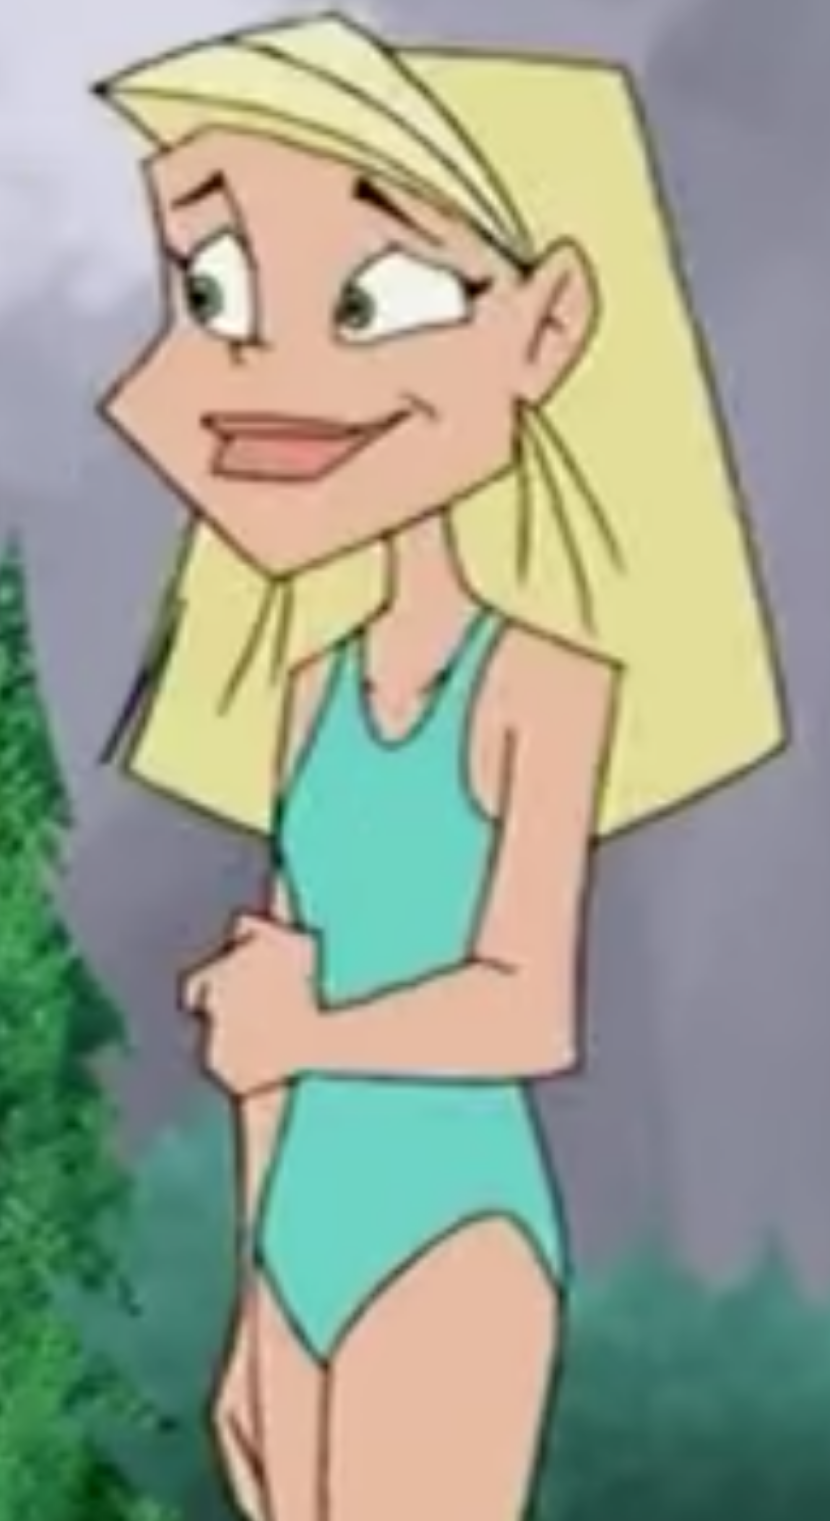 Image Sharon Spitz Swimsuit By Daphnetf Daf5a6npng Braceface Wiki Fandom Powered By Wikia 7396